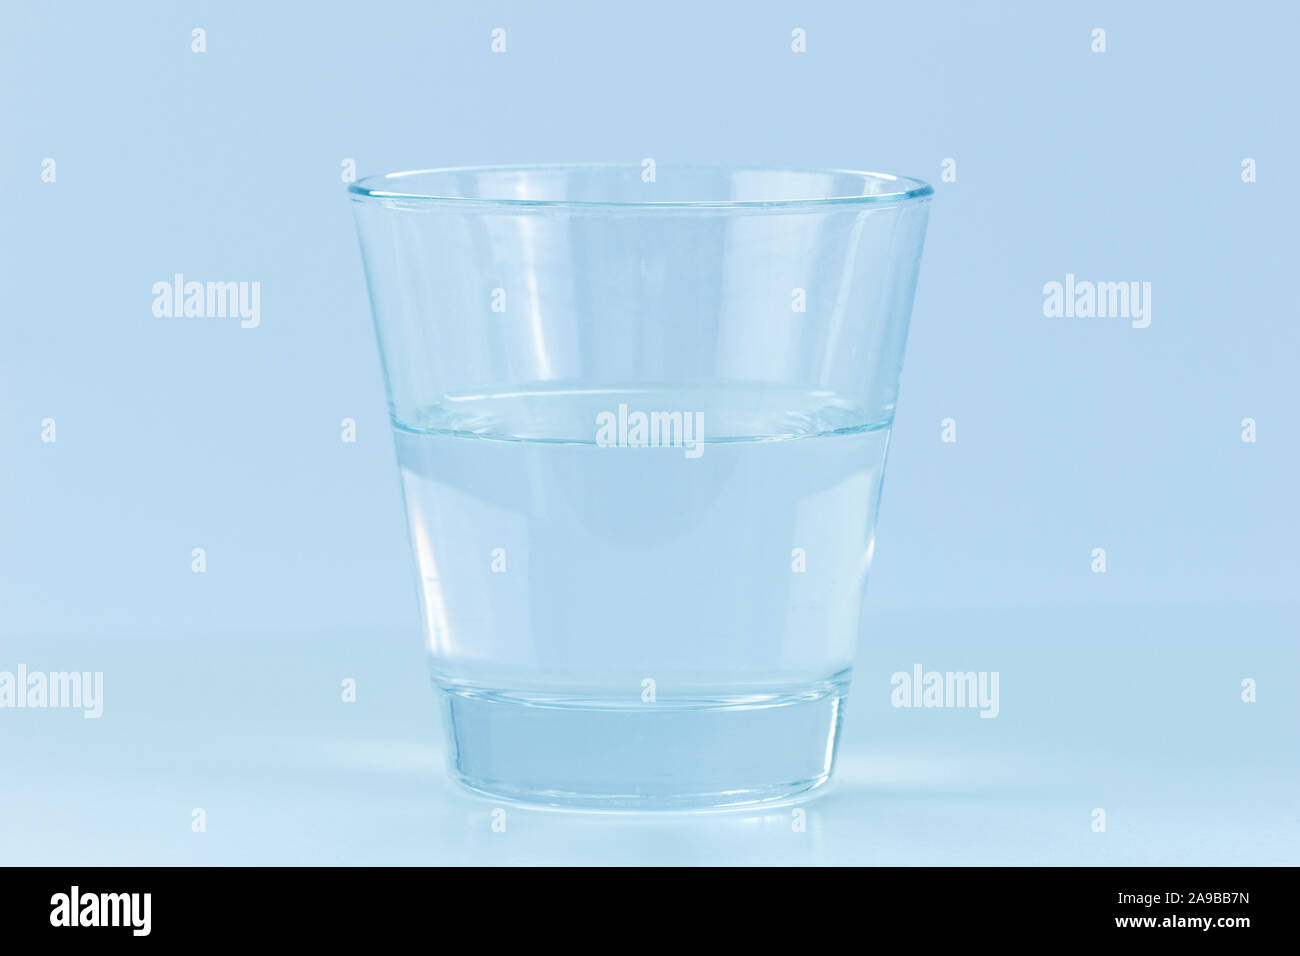 Close-up of a transparent drinking glass half full or empty of water. Concept photo of positive or negative attitude. Blue hue. Stock Photo